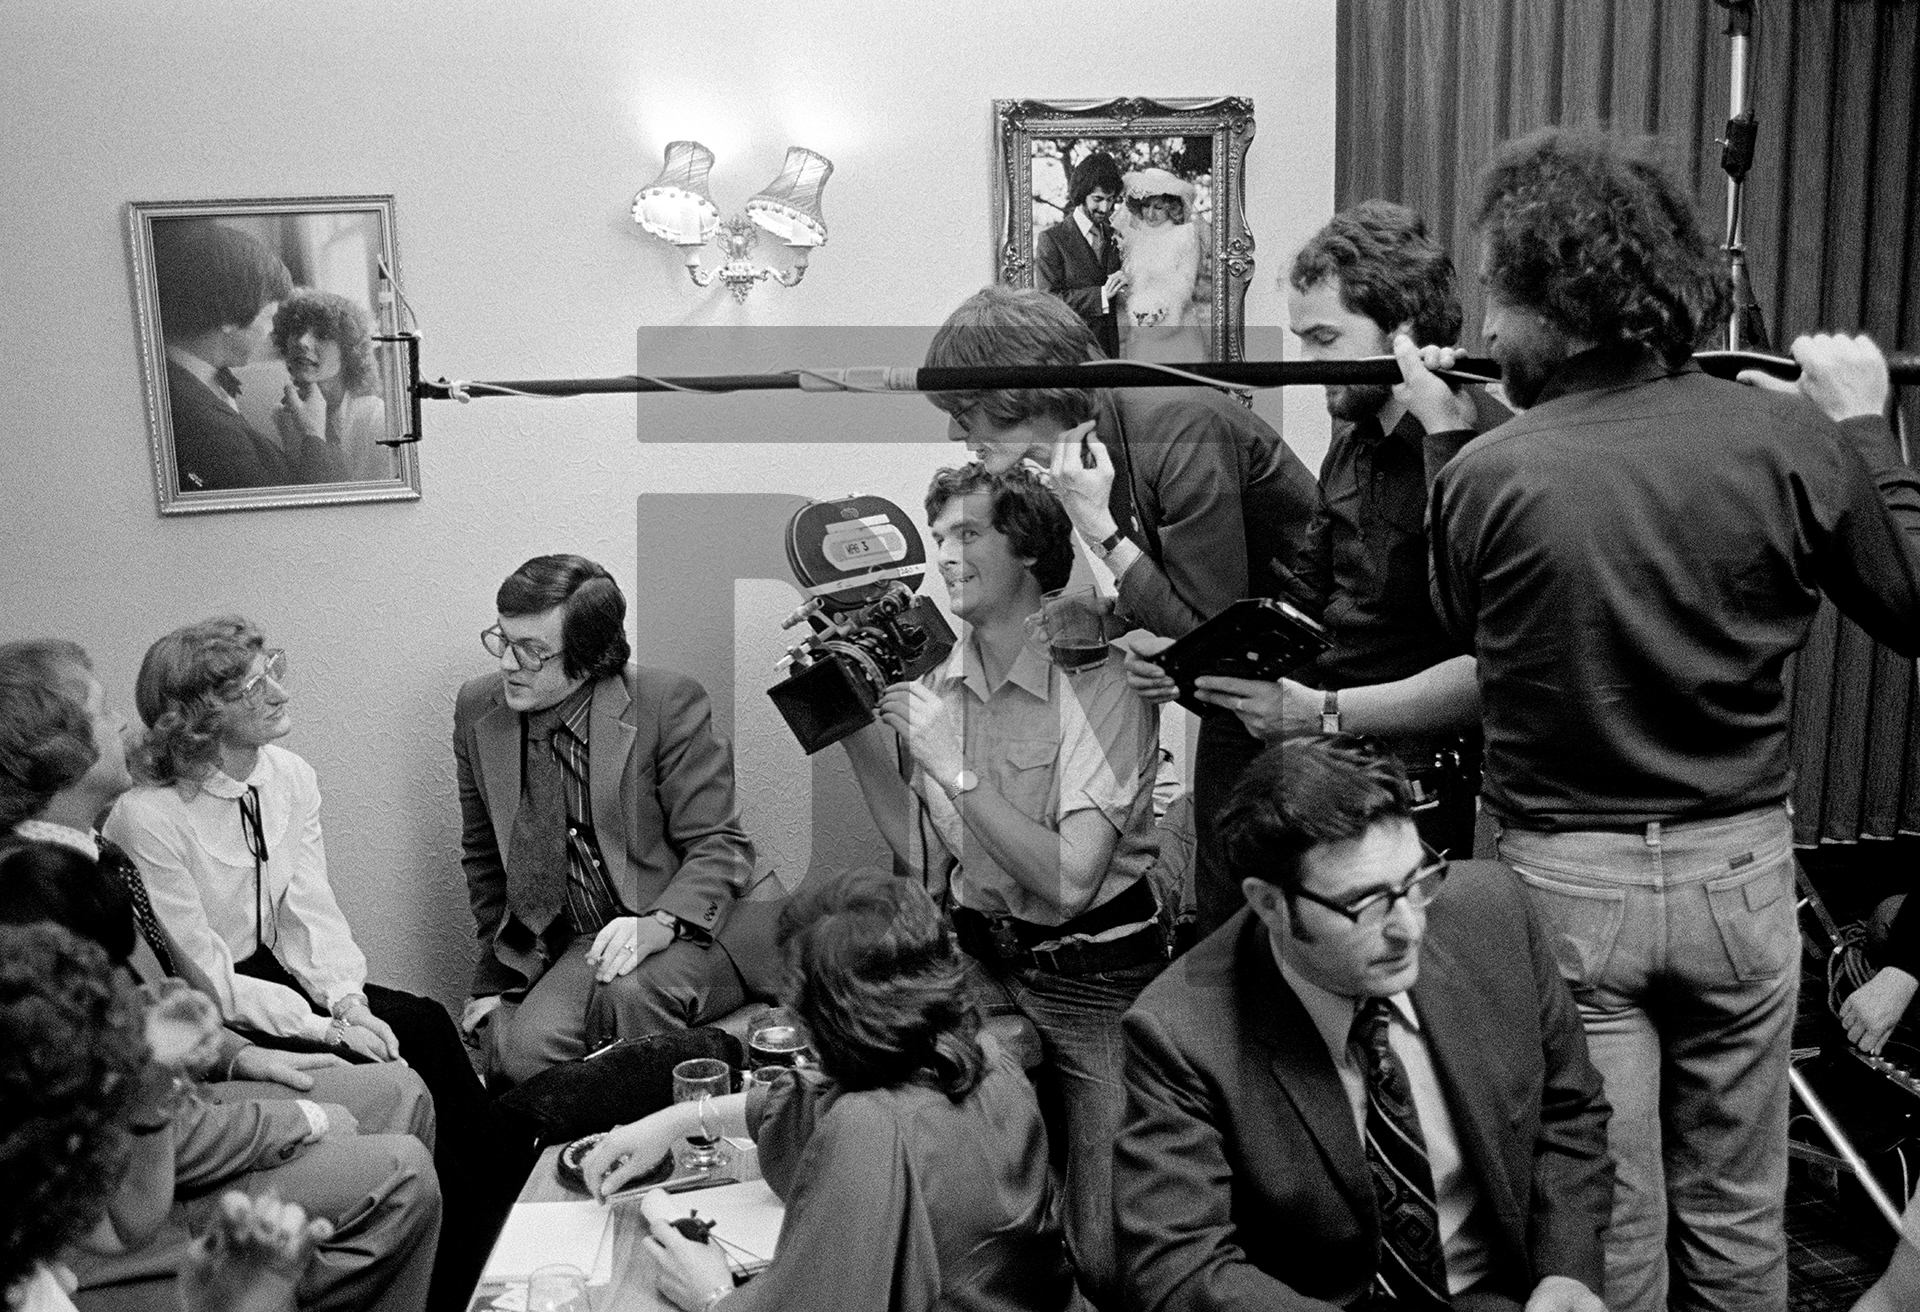 Filming on location, the ‘What’s On’ crew in a singles’ club, Mike Riddoch (in suit) conducts interview, David Liddiment directs, Manchester. April 1979 by Daniel Meadows